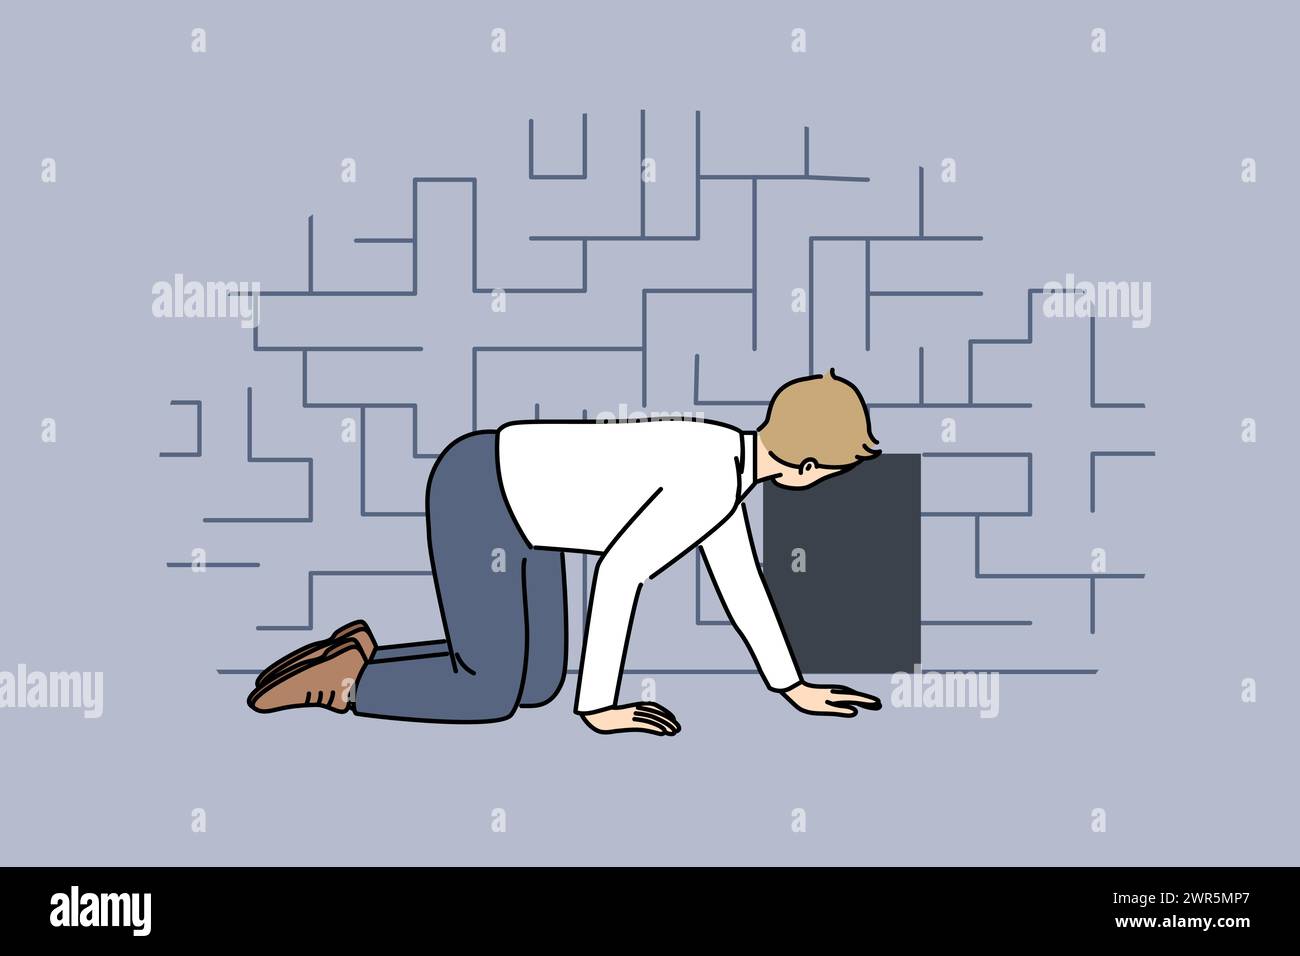 Man searching exit from labyrinth, crawling on floor near miniature door, as metaphor for difficult life situation. Guy is looking for way out of labyrinth, and needs hint or help. Stock Vector